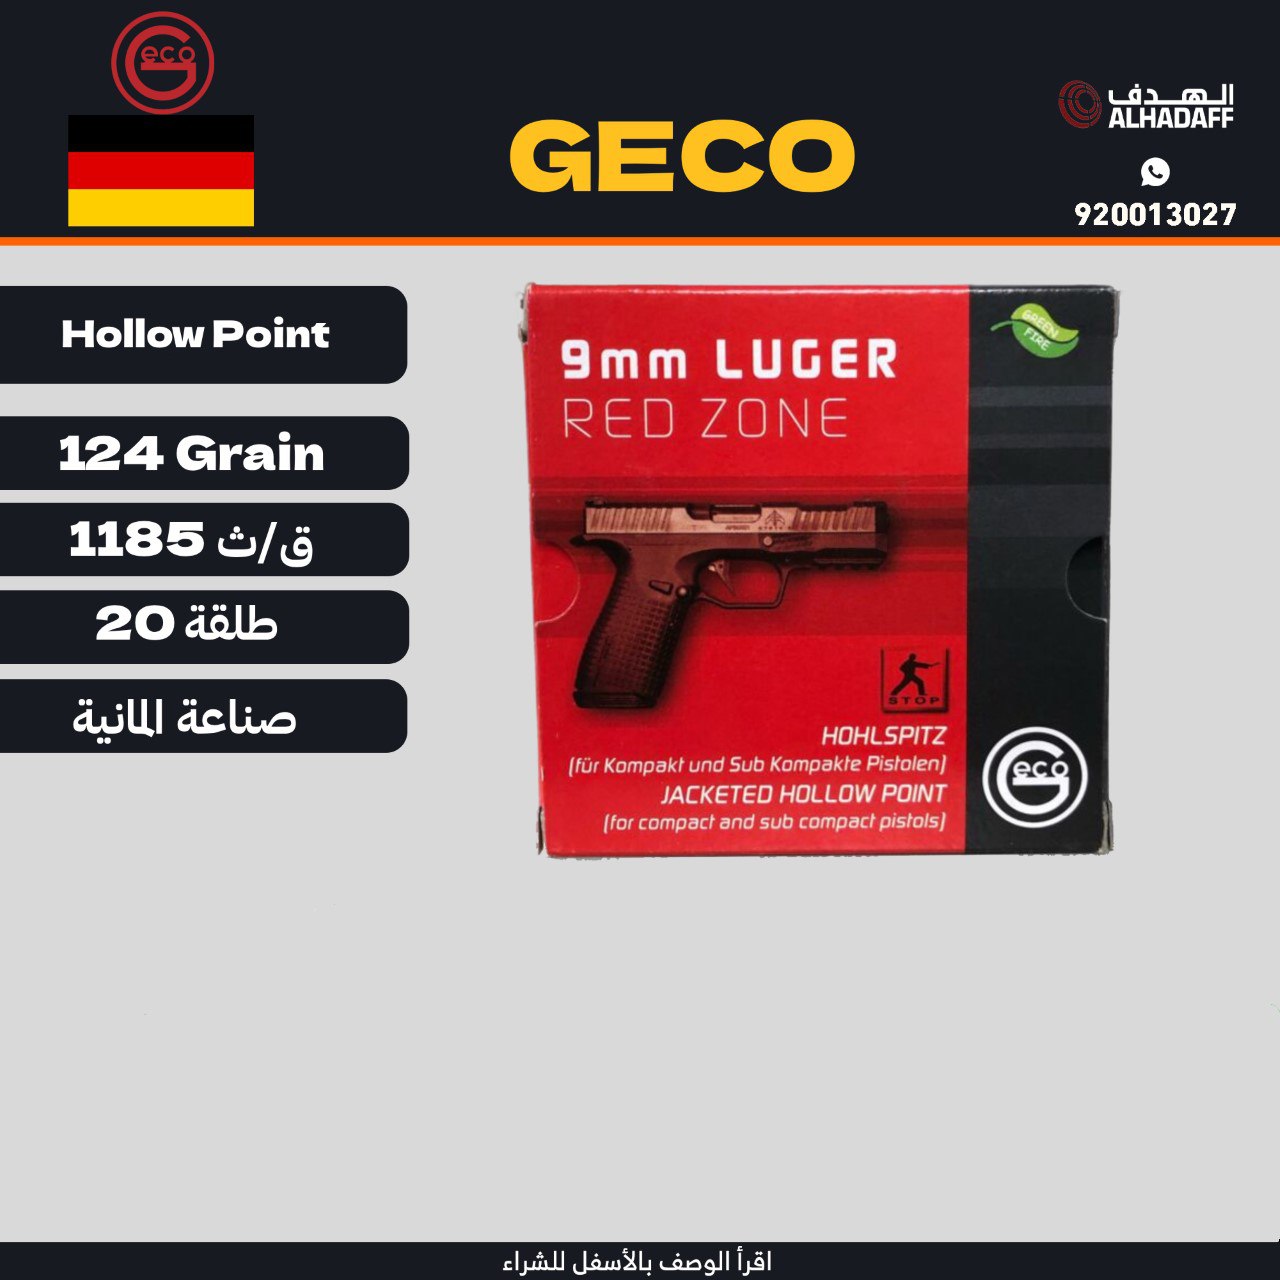 GECO RED ZONE 9MM 124 GRAIN 8.0 G, JACKETED HOLLOW POINT 20 RoundS